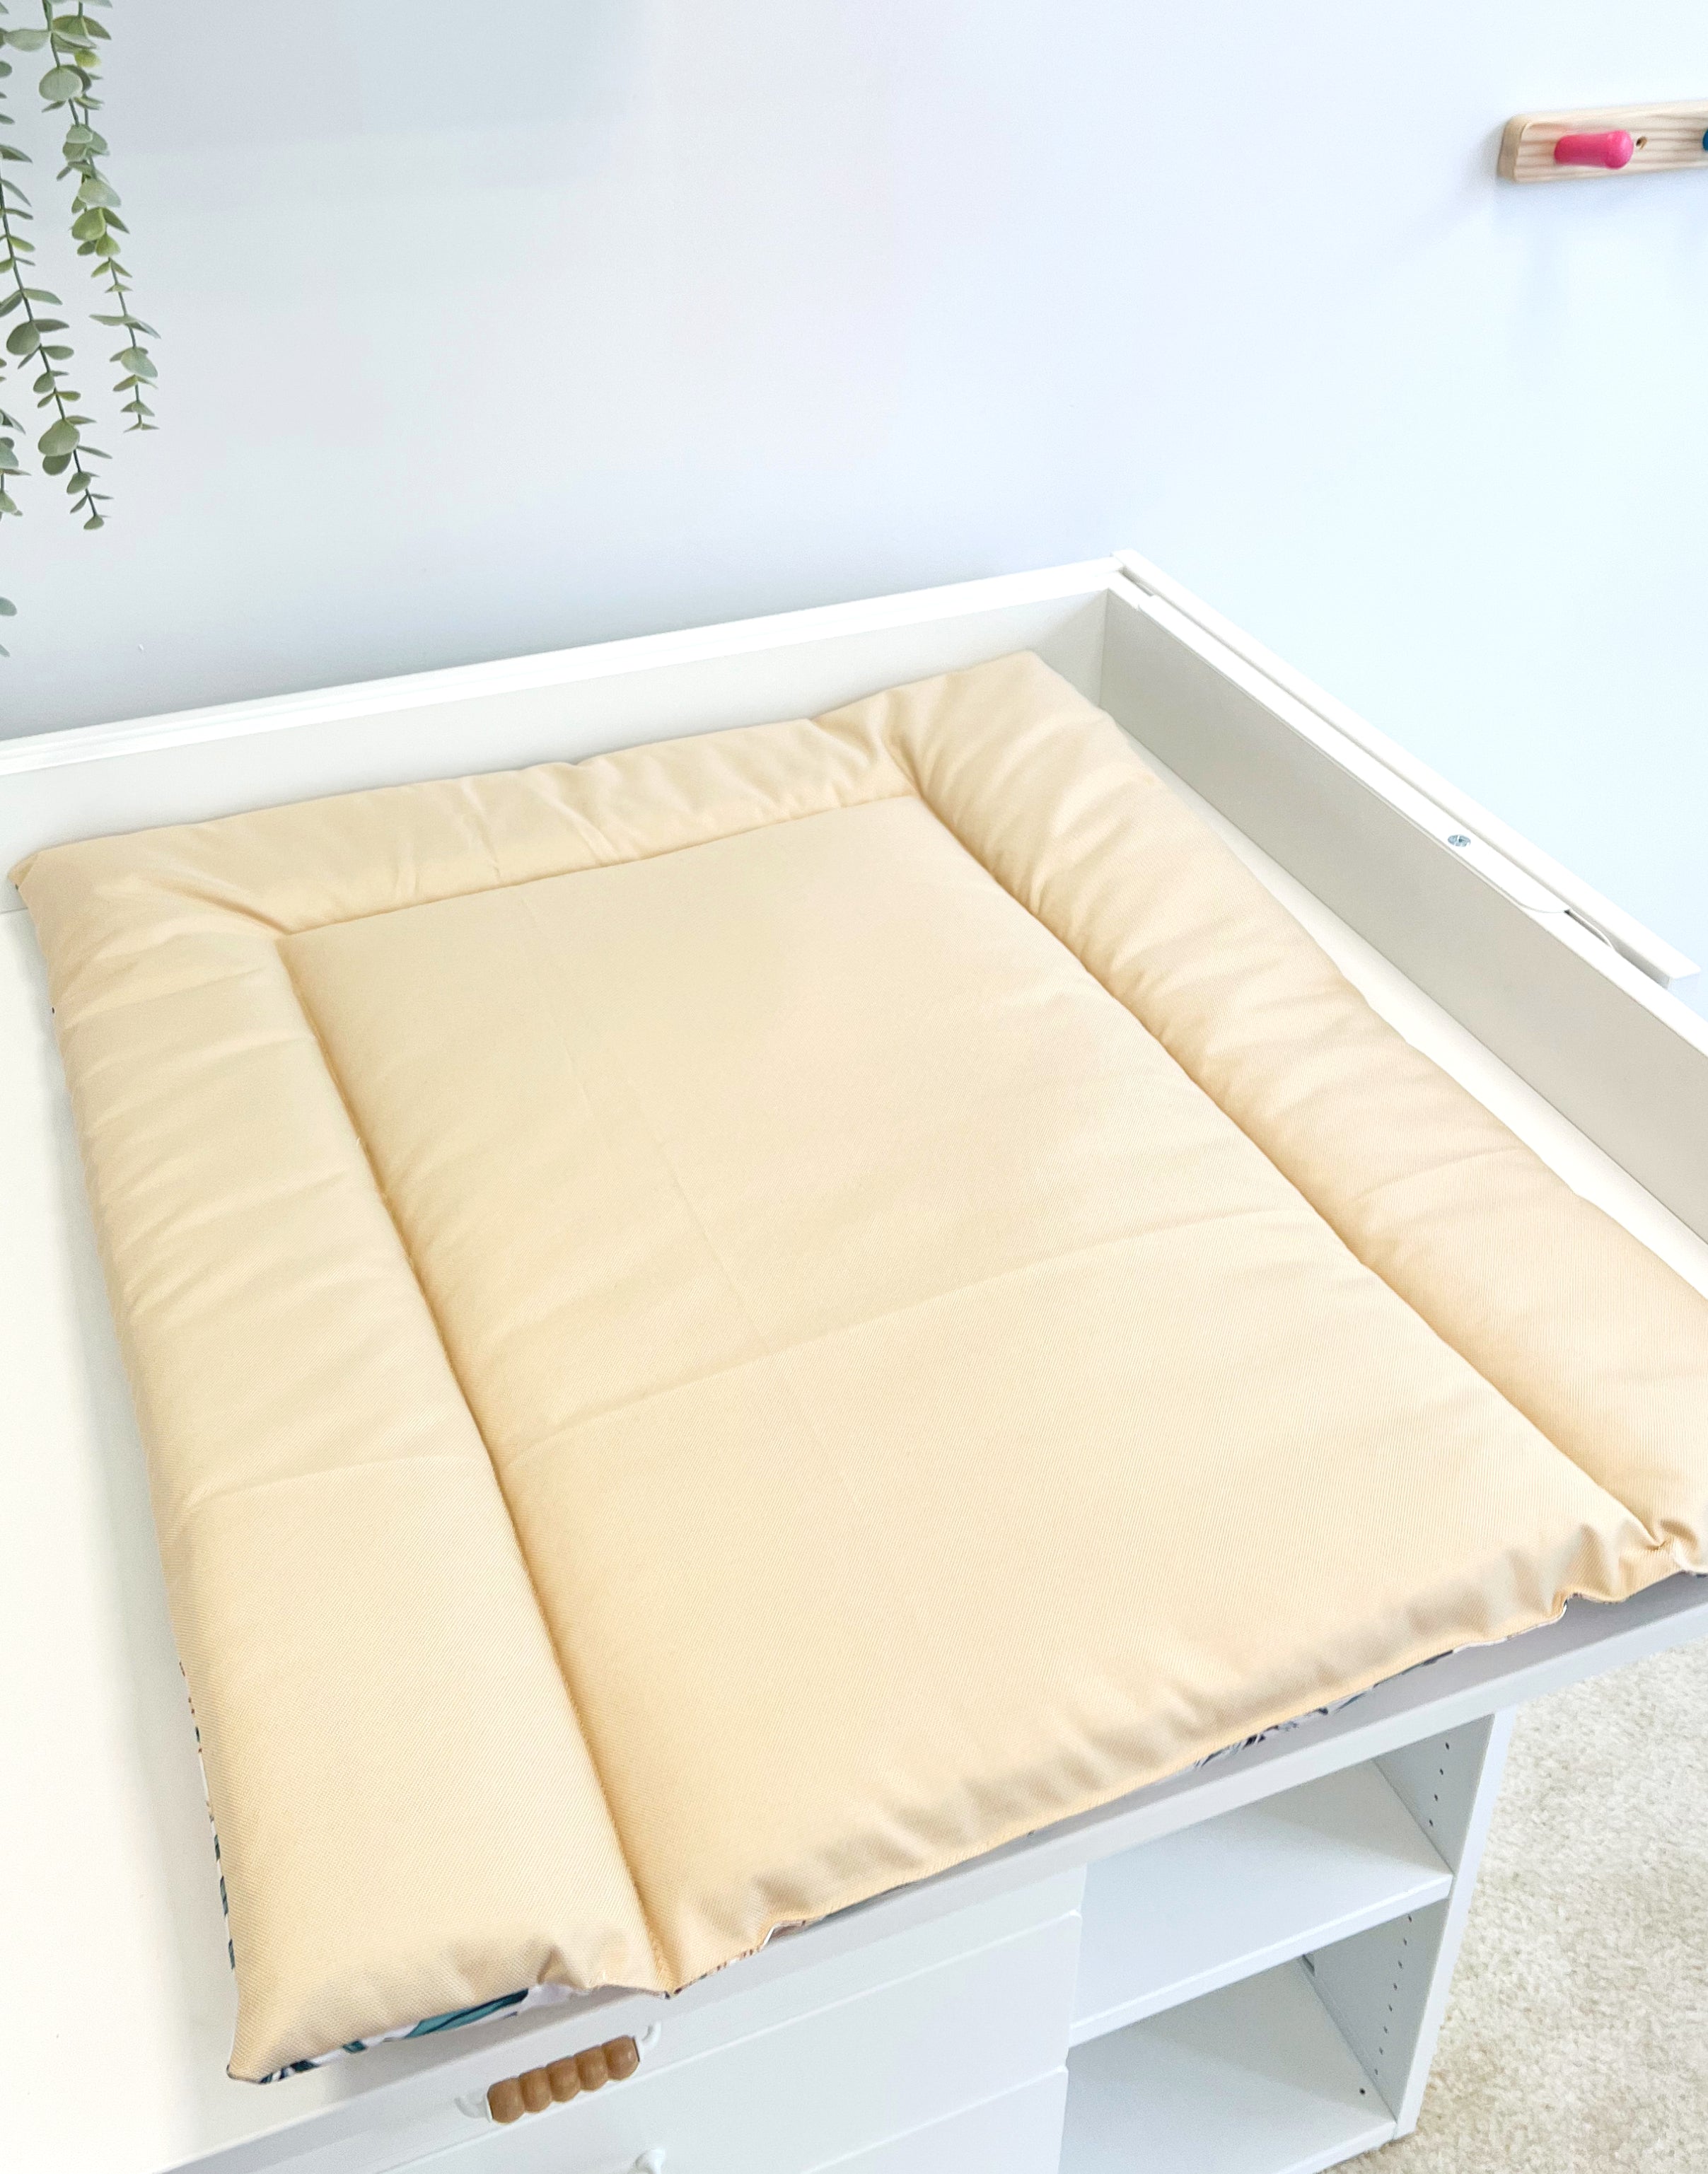 Water-resistant changing pad - Solid color